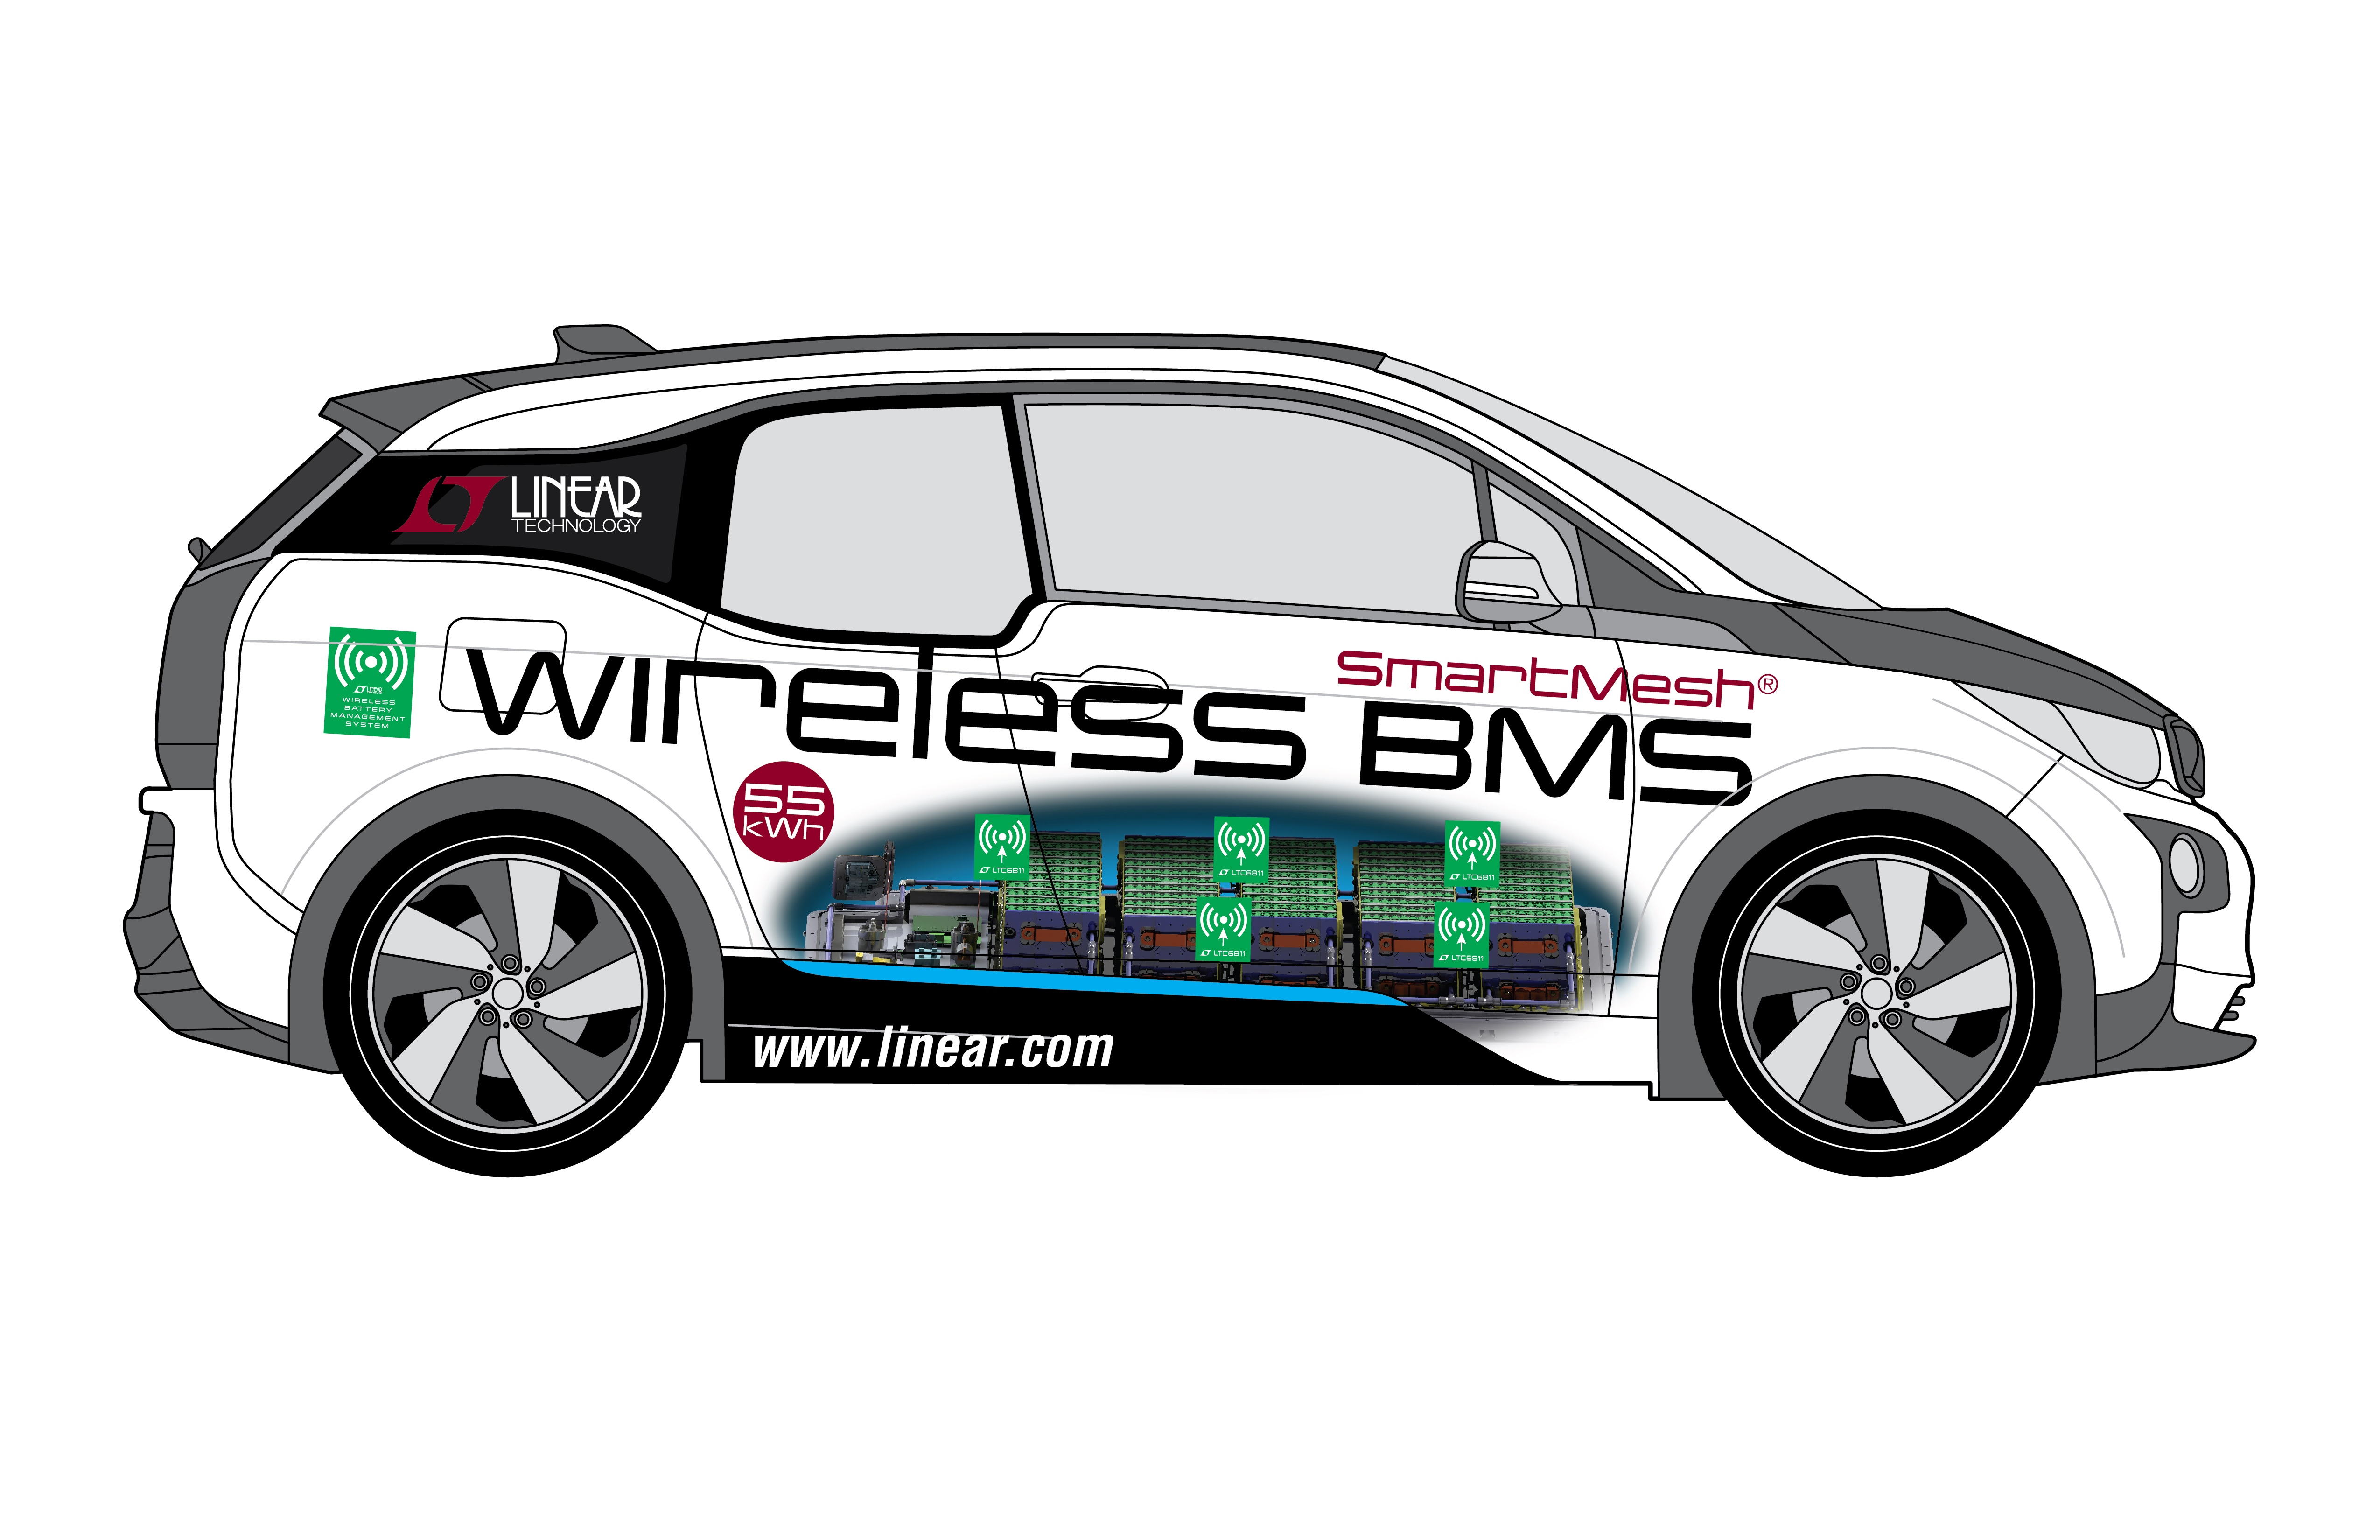 Wireless battery management system aids concept car